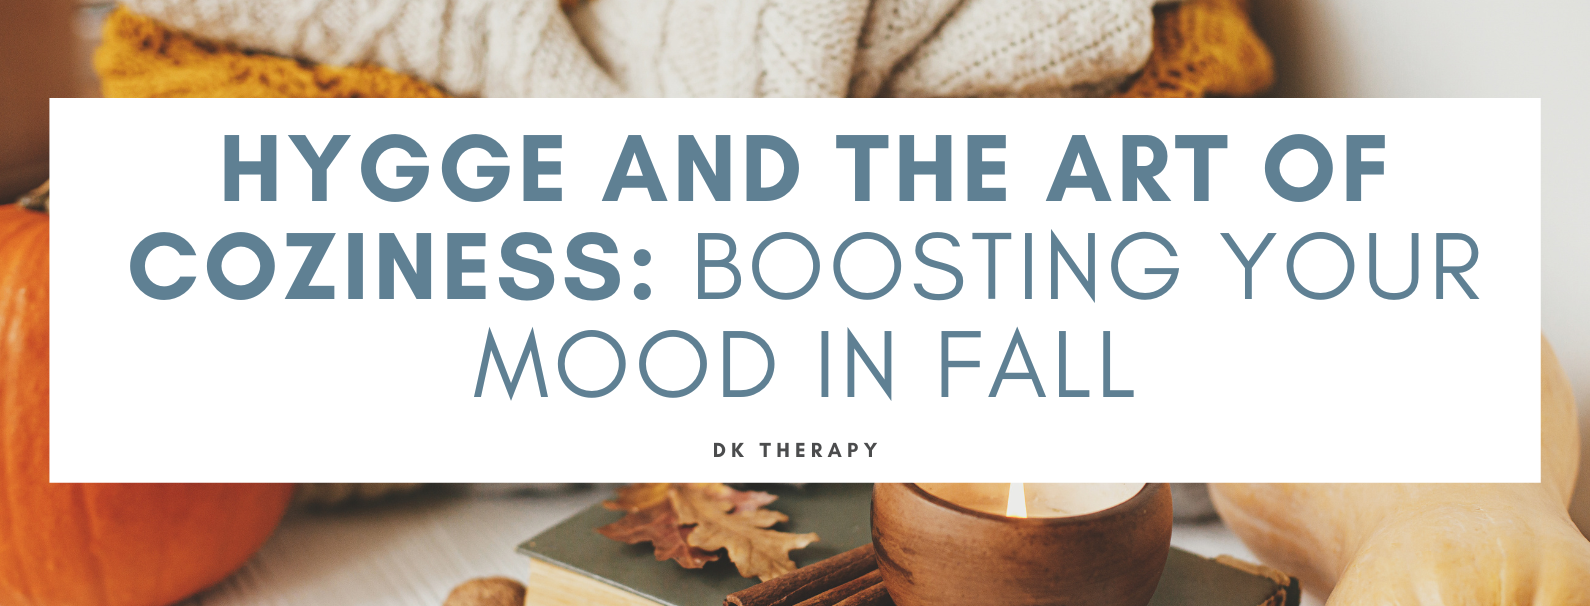 Hygge and the Art of Coziness Boosting Your Mood in Fall